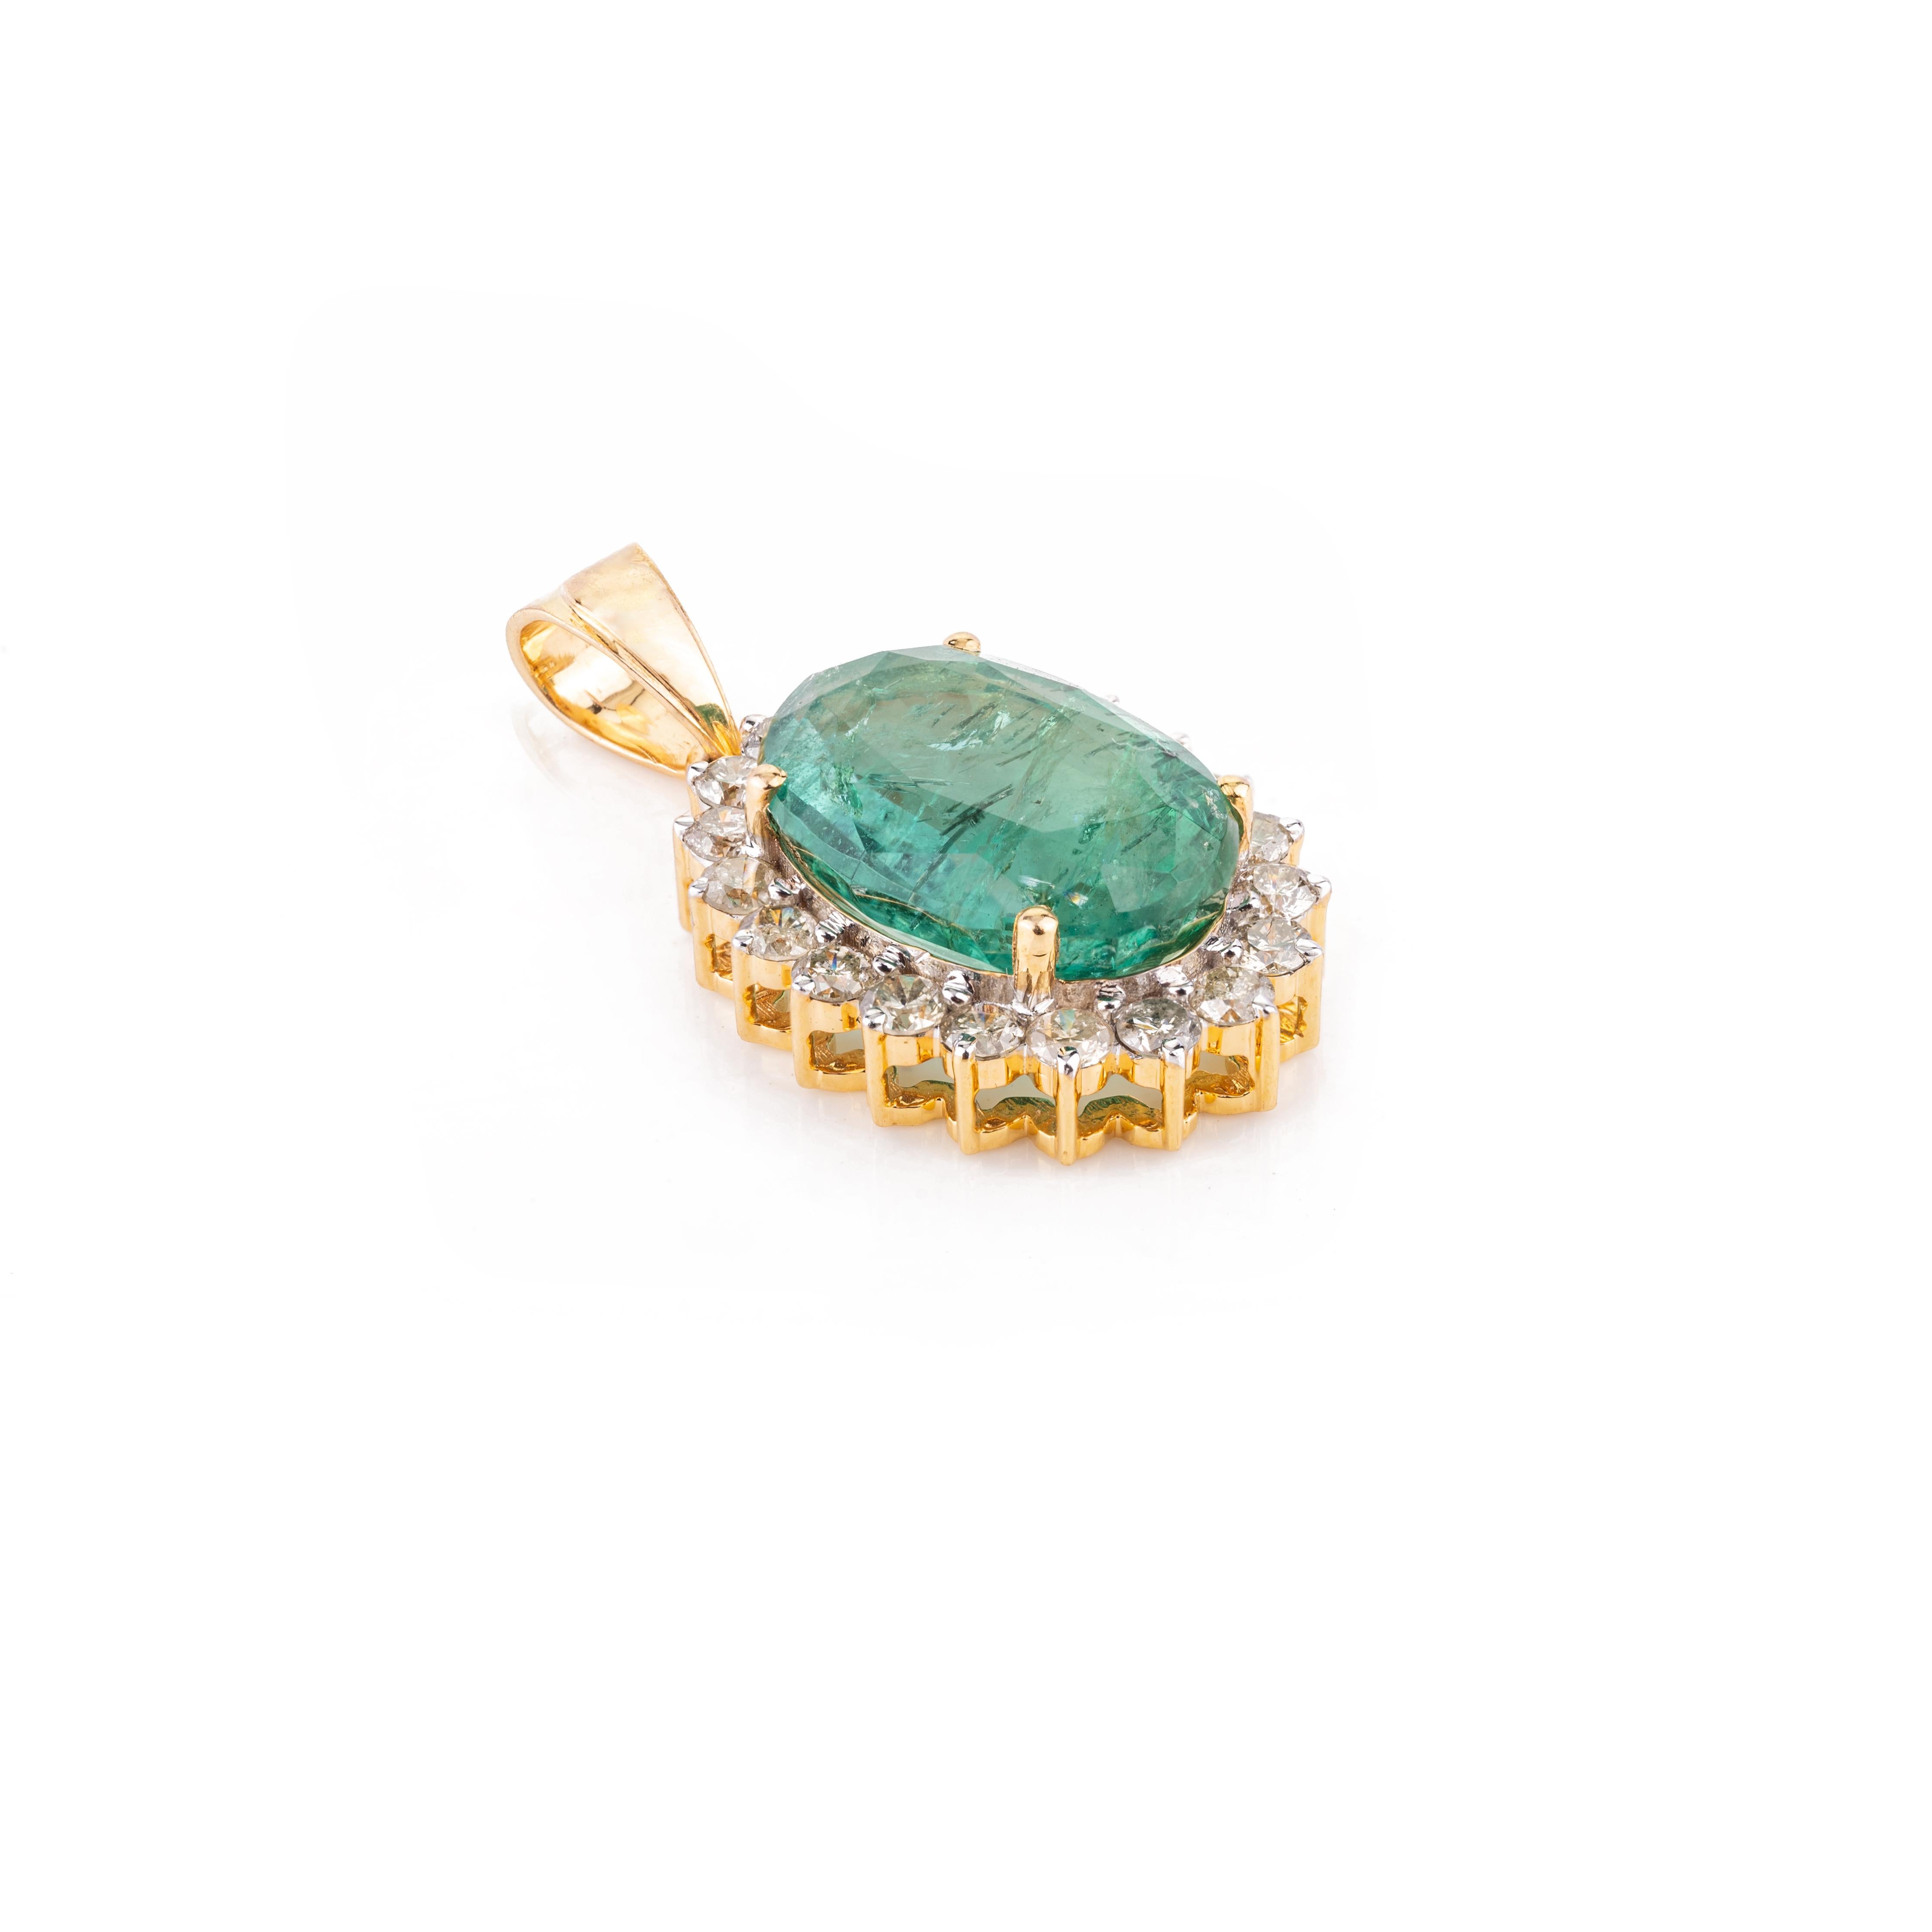 4.2 Carat Big Emerald Diamond Halo Pendant in 14k Solid Yellow Gold In New Condition For Sale In Houston, TX